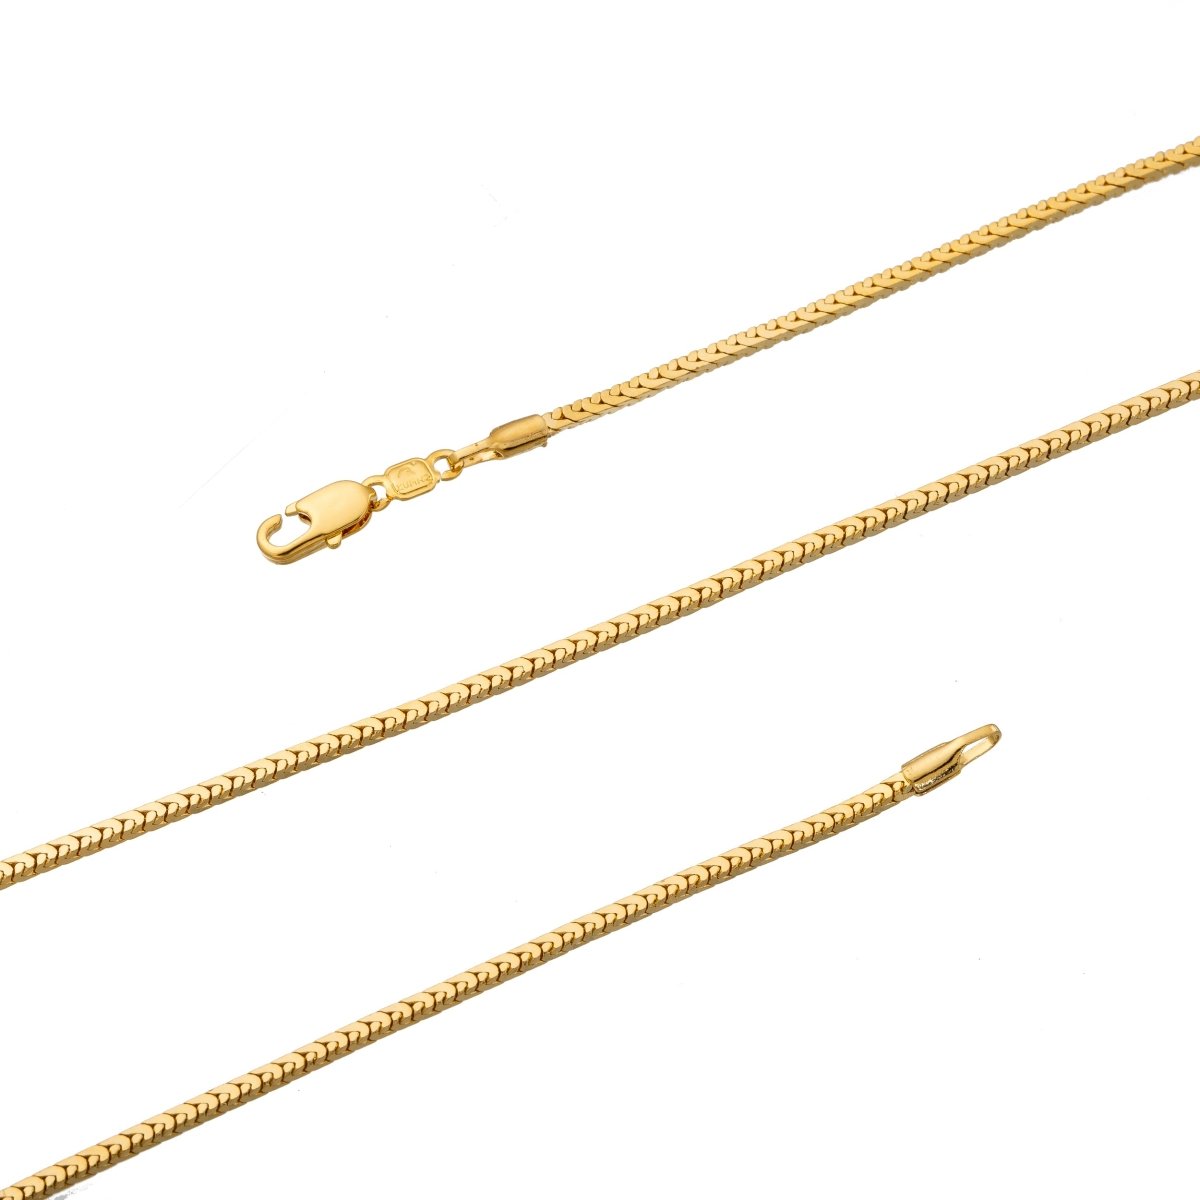 19.5 inch Snake Brazilian Star Weave Necklace Chain, 24K Gold Plated Designed Finished Necklace For Jewelry Making, Dainty 2.2mm Designed Necklace w/ Lobster Clasps | CN-186 Clearance Pricing - DLUXCA